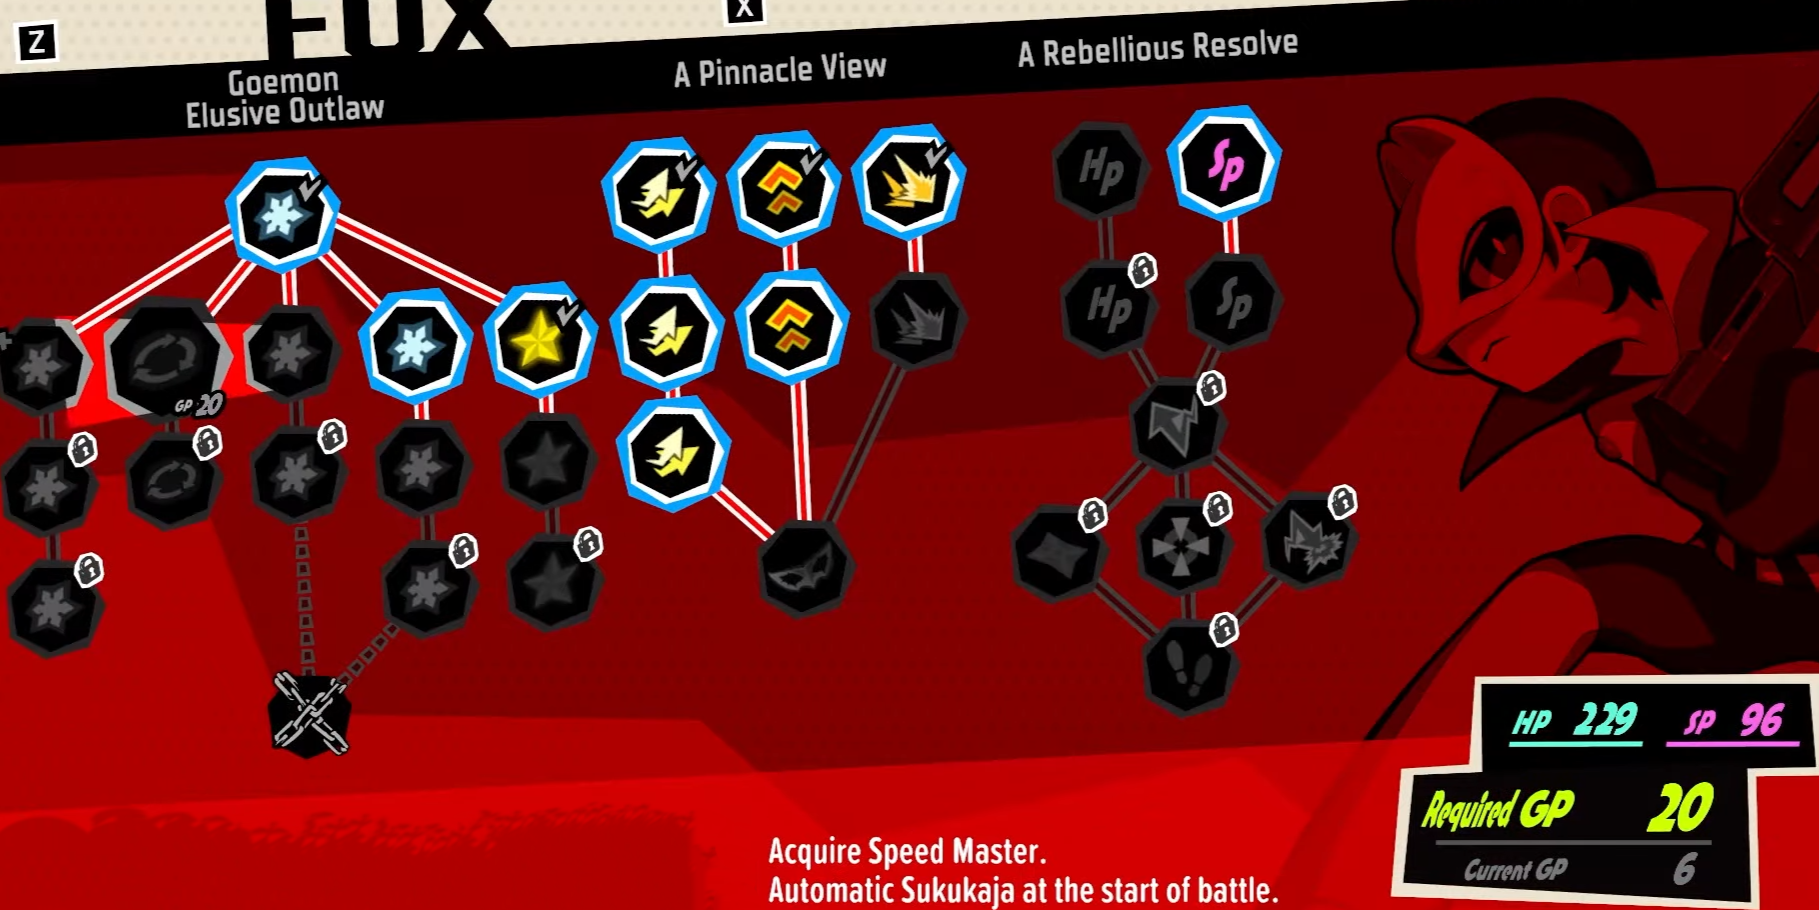 Persona 5 Tactica Fox's Skill Tree showing the Speed Master Skill which gives an Auto-Masuku.